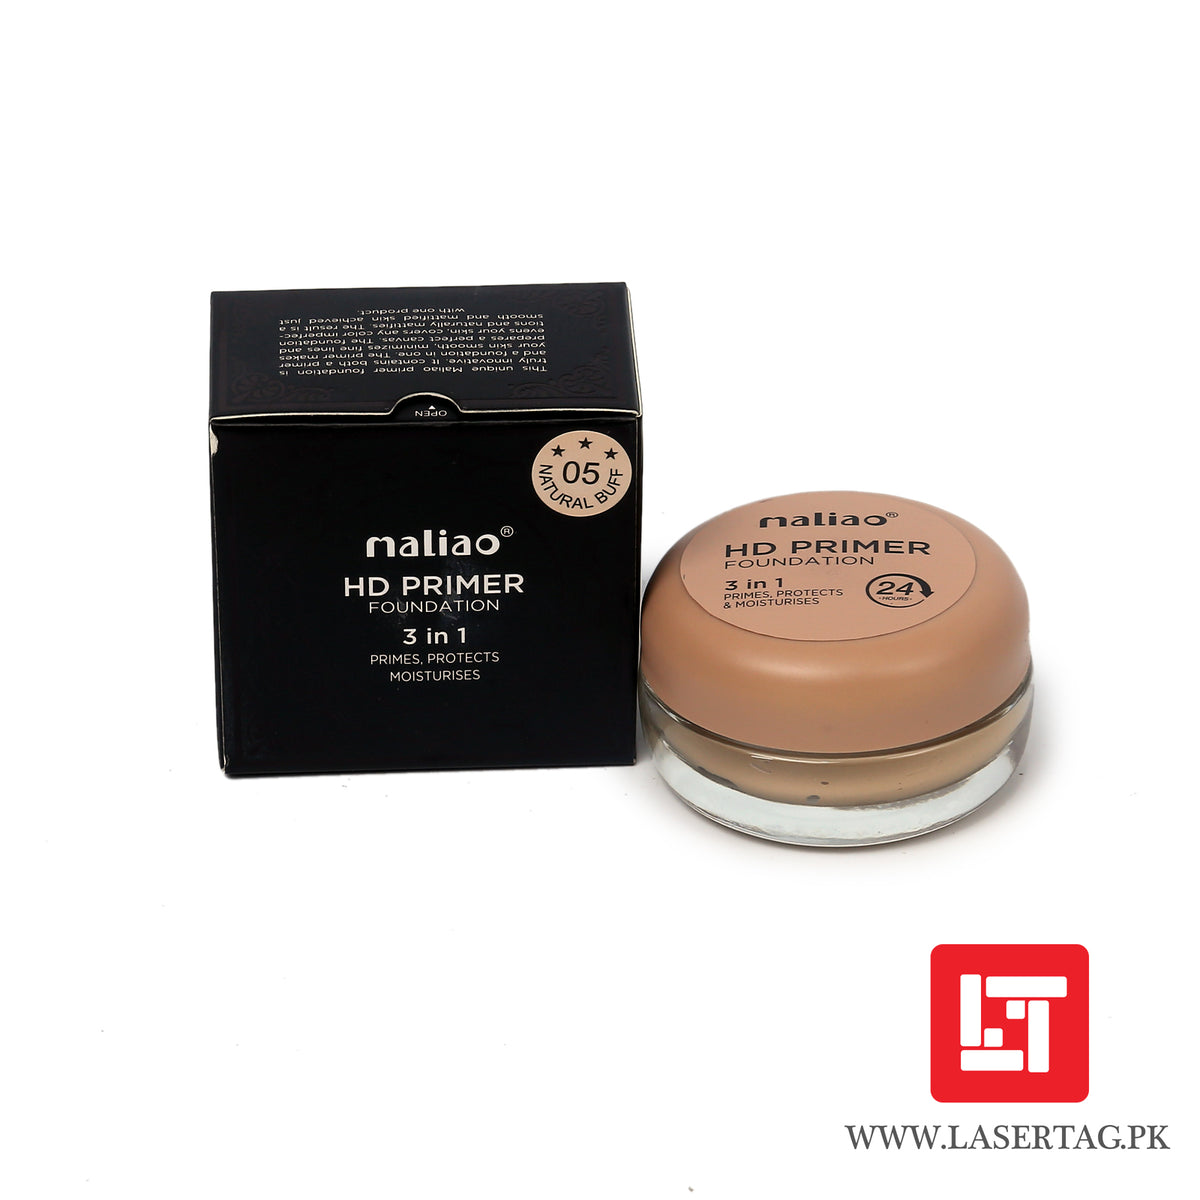 Maliao HD Primer Foundation 3 In 1 Primes, Protects, Moisturises Natural Buff M227-05 20g freeshipping - lasertag.pk